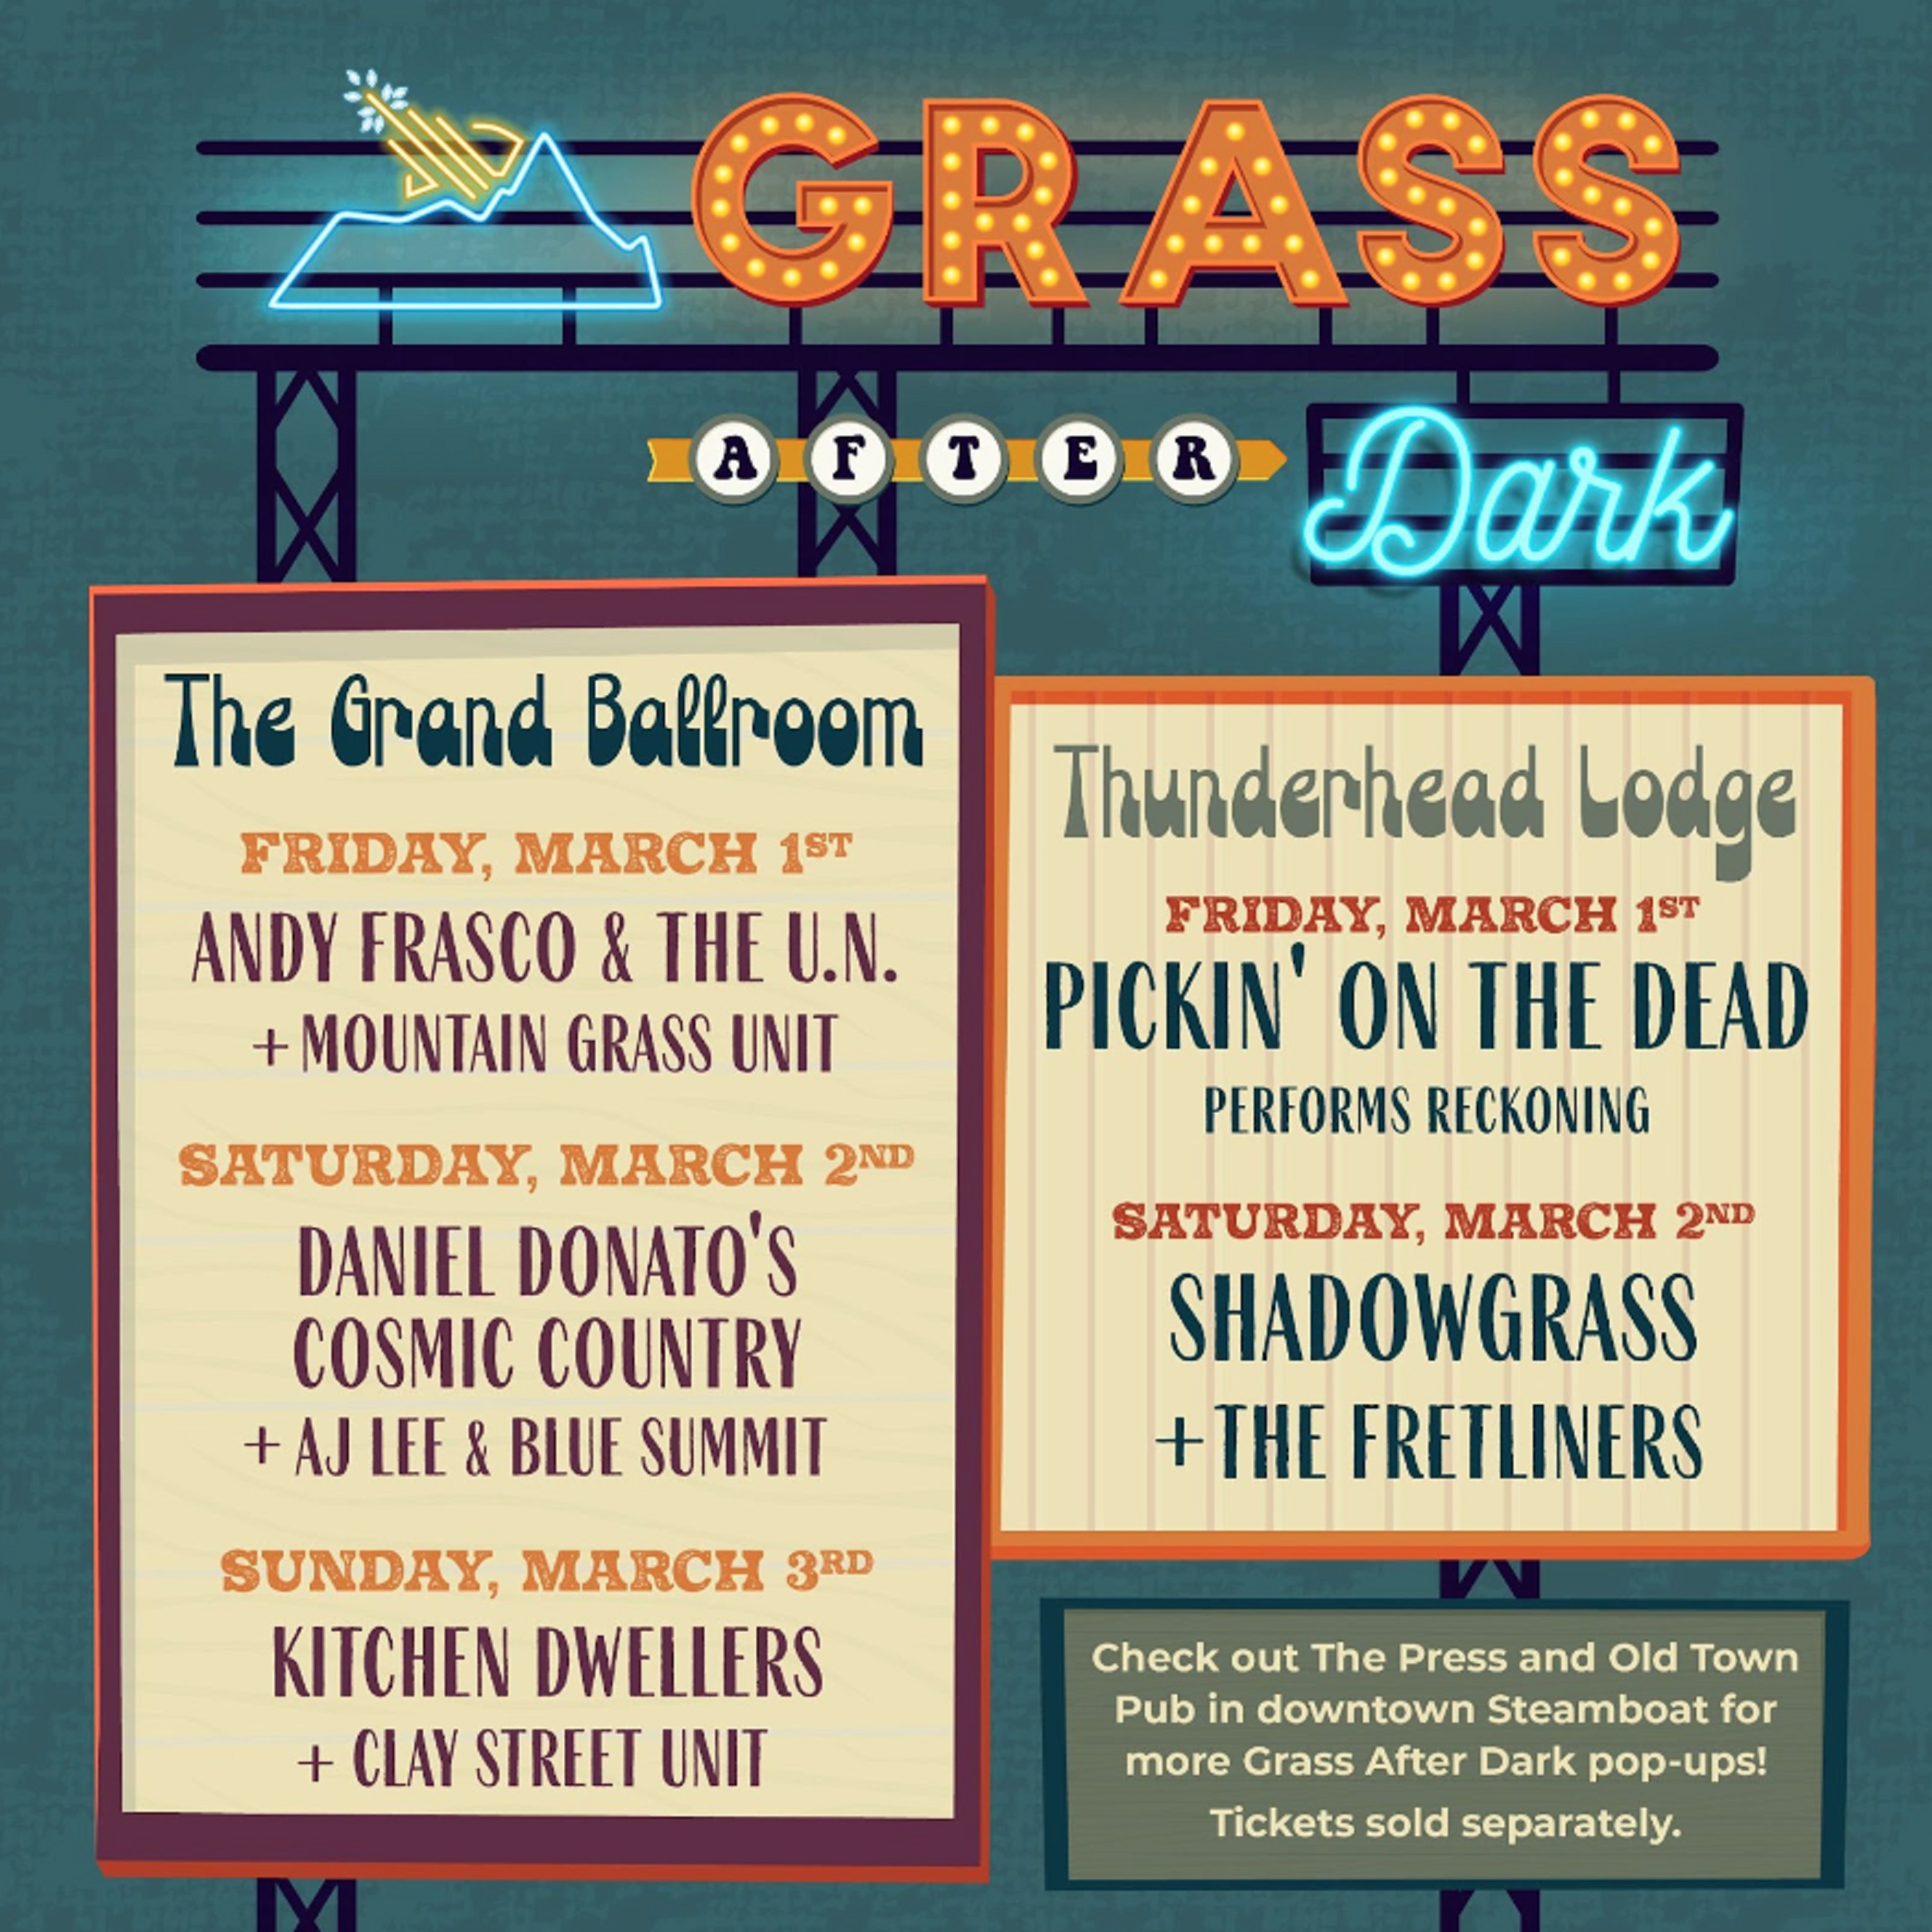 WinterWonderGrass Steamboat's Grass After Dark ft. Andy Frasco, Daniel Donato, Kitchen Dwellers and more; on sale now